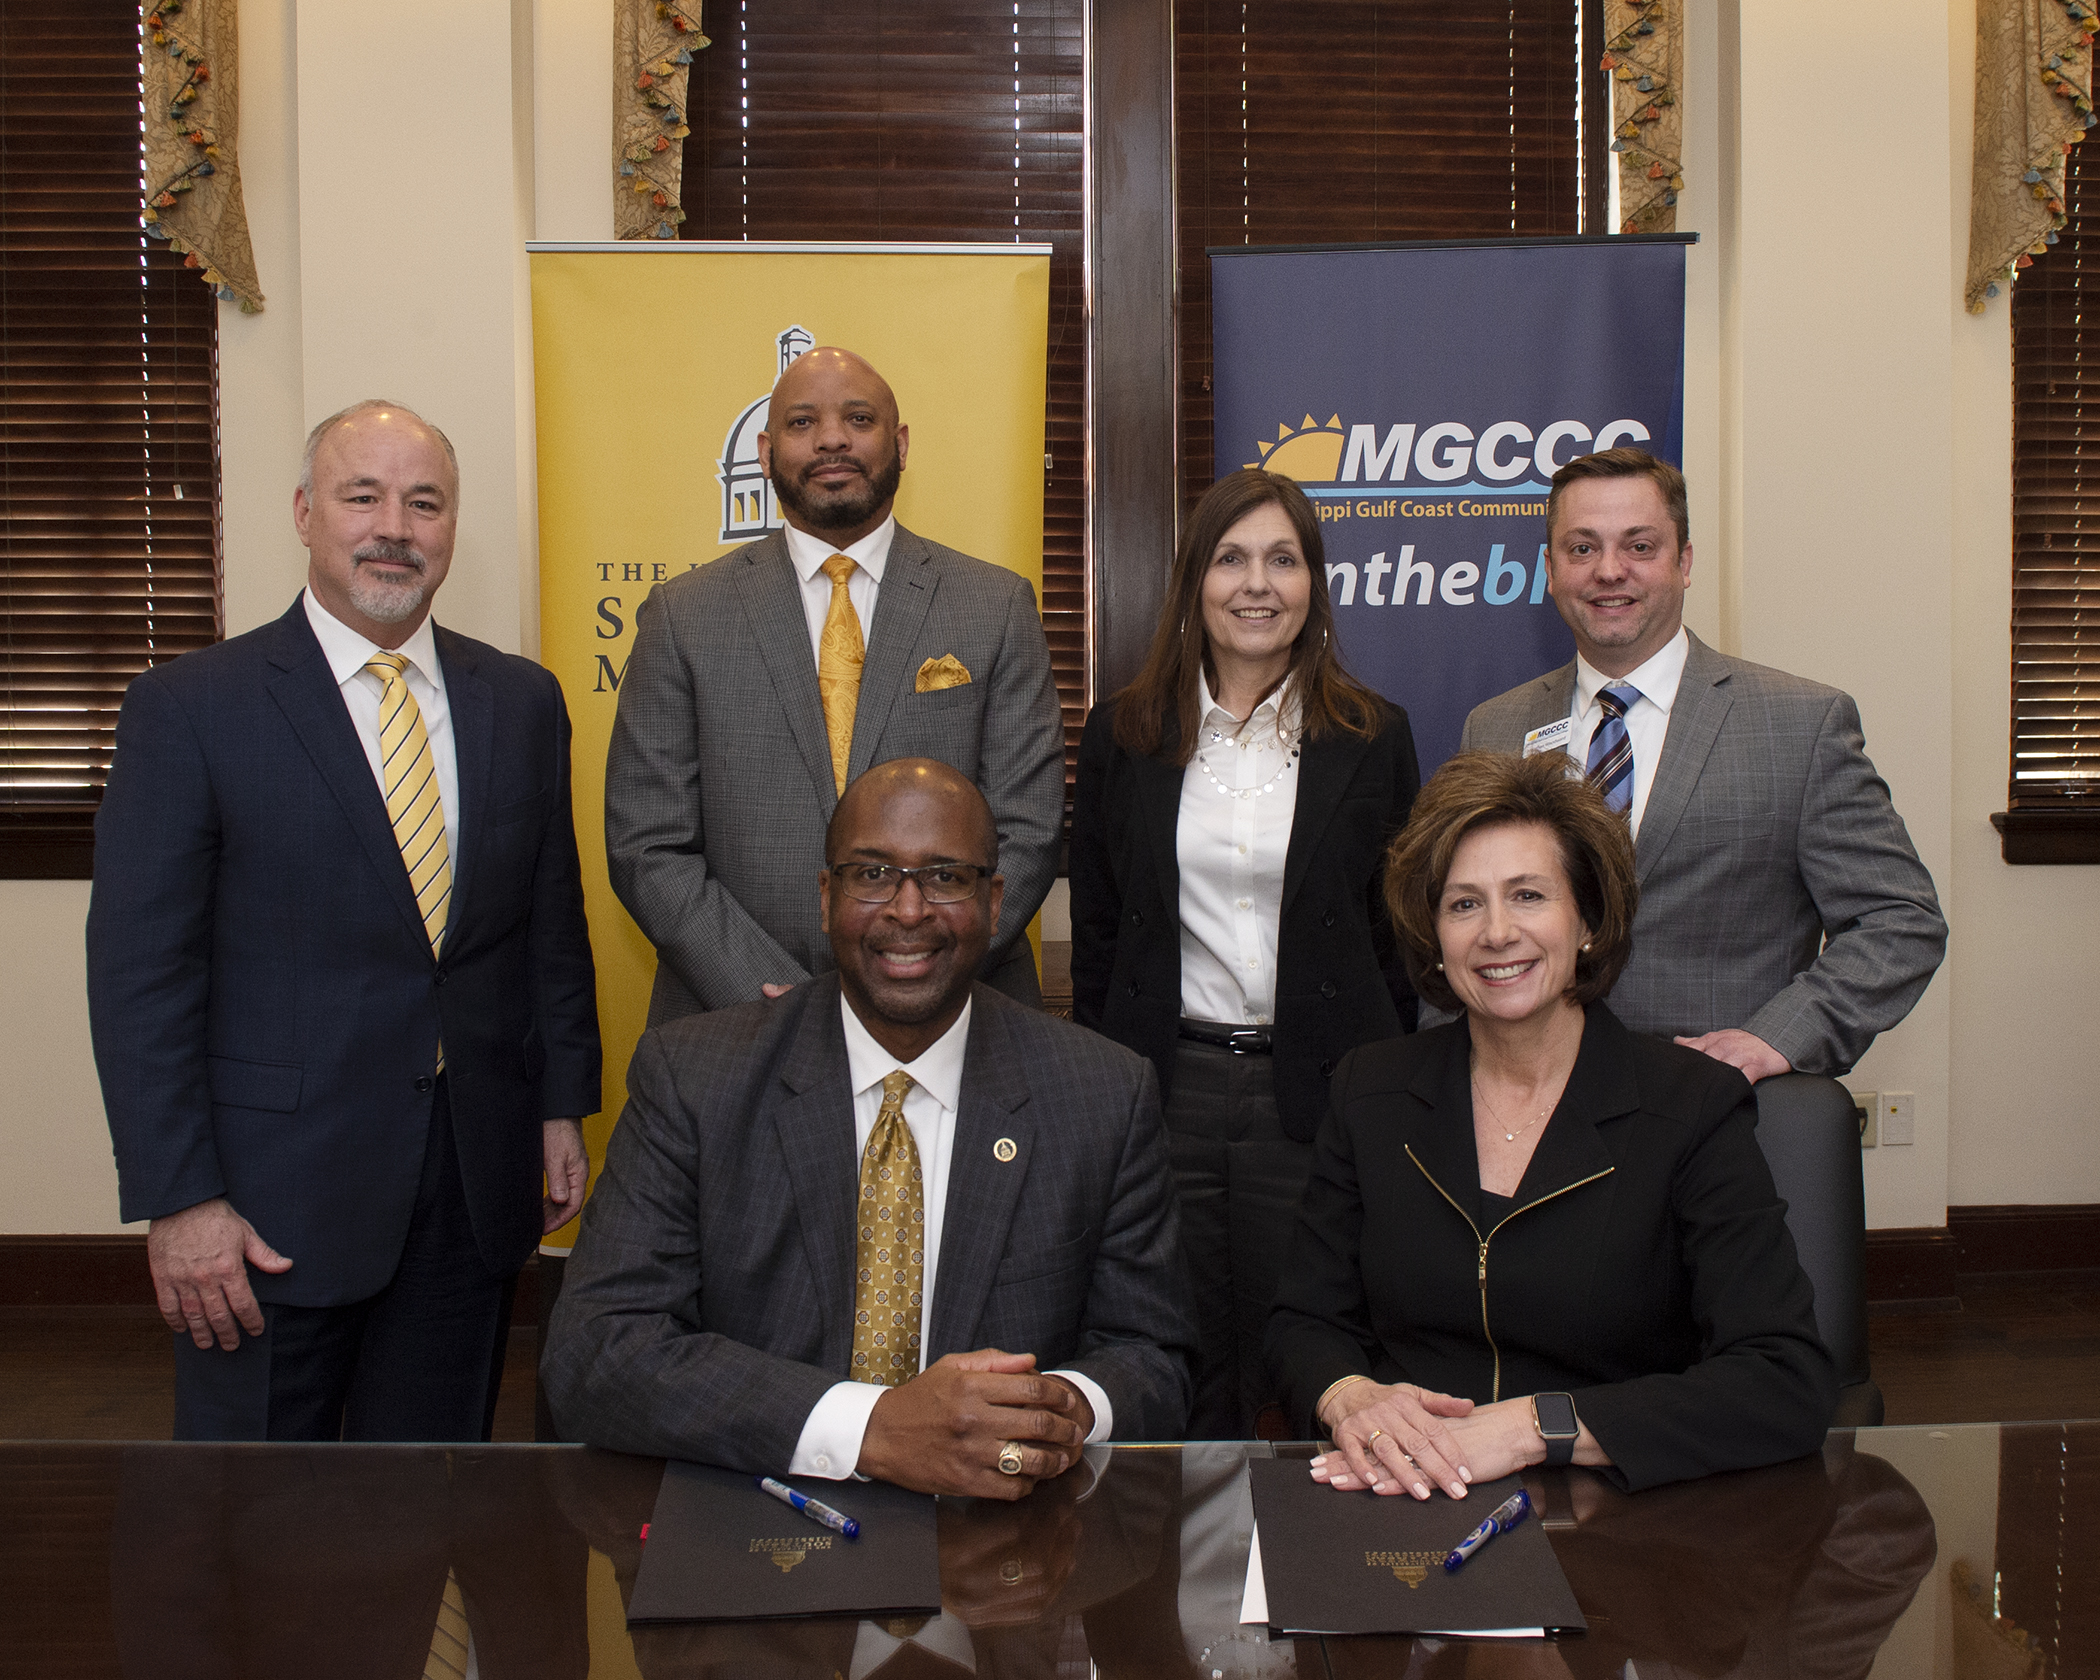 ) Seated are Dr. Rodney D. Bennett, USM president, and Dr. Mary S. Graham, MGCCC president. Standing, from left, are Dr. Steven R. Moser, provost and senior vice president for Academic Affairs at USM; Dr. Alfred Rankins Jr., Mississippi Institutions of Higher Learning Commissioner Of Higher Education; Dr. Andrea Mayfield, executive director of the Mississippi Community College Board; and Dr. Jonathan Woodward, MGCCC executive vice president, Teaching & Learning/Community Campus.